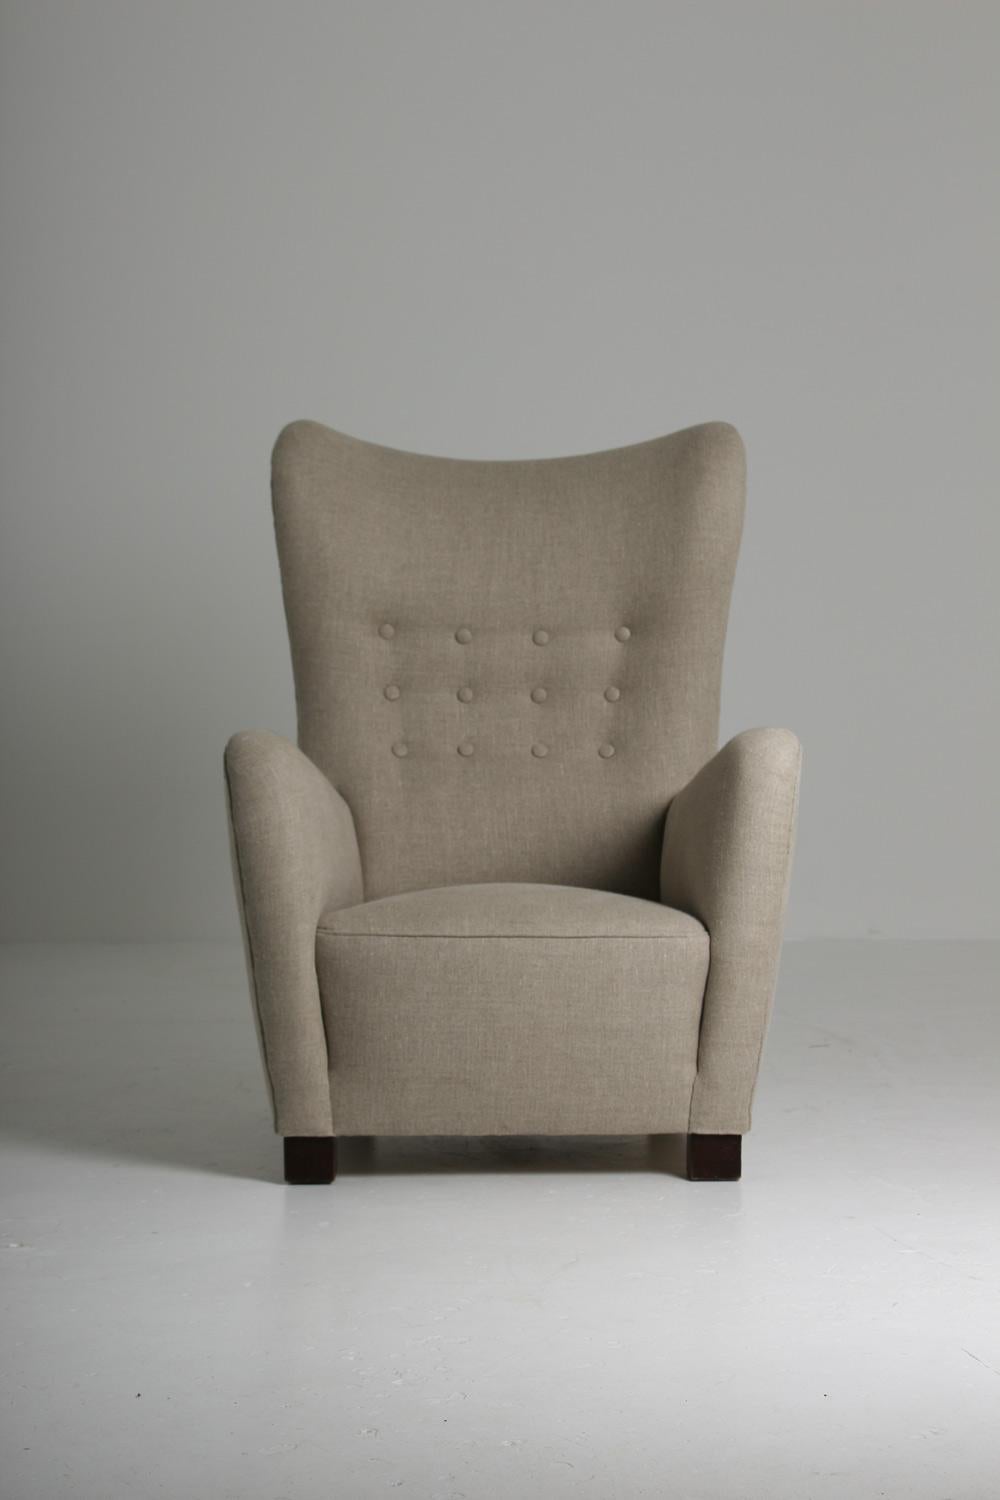 Impressive as much as its elegant with its silhouette formed wingbacks and striking solid angular armrests. Produced by Fritz Hansen in 1946 this 1672 Lounge chair, has been fully restored and reupholstered in fine weave linen of the highest